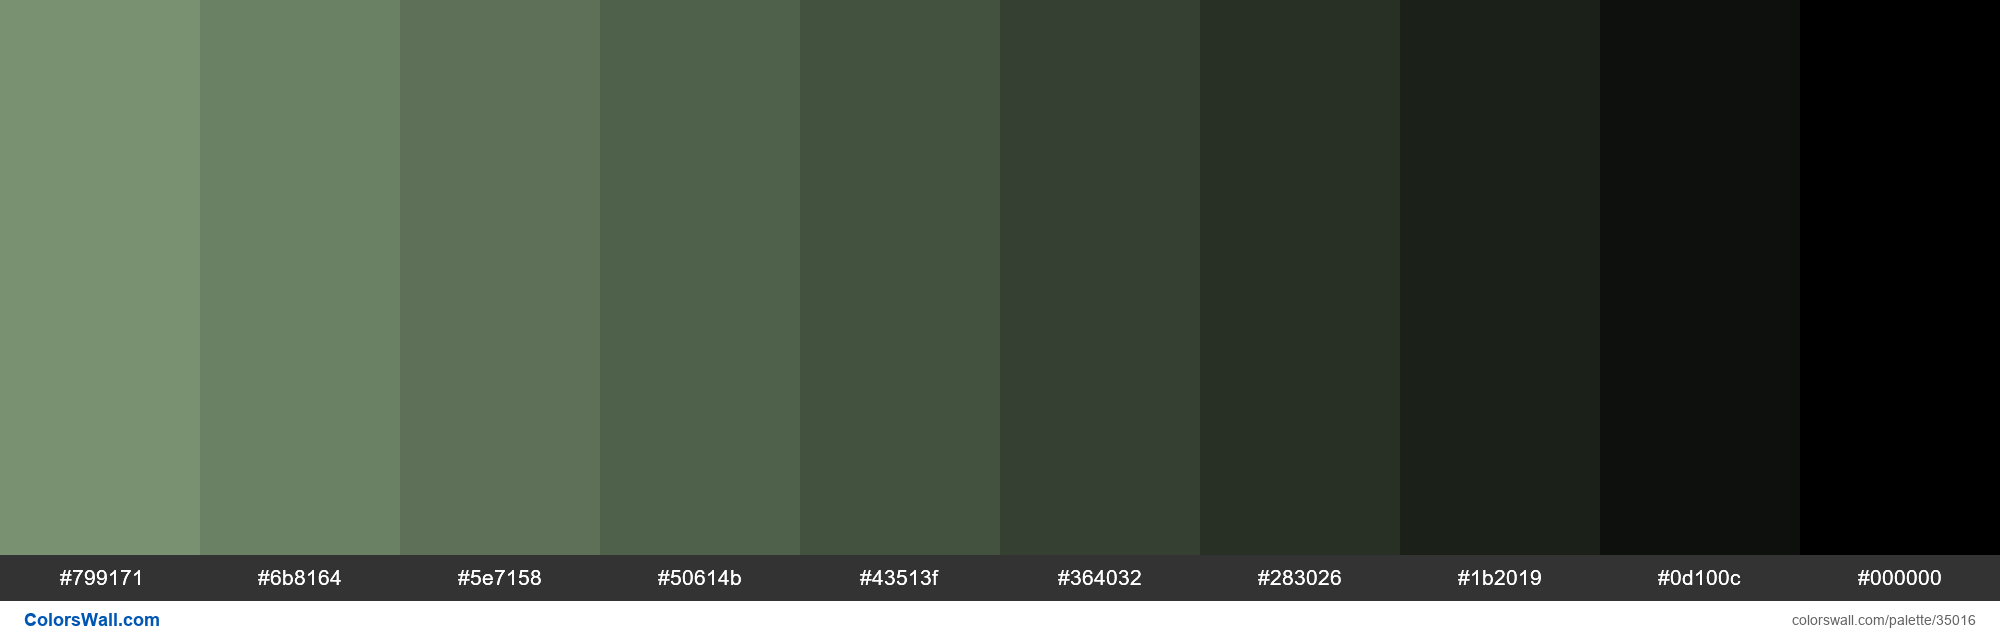 Shades XKCD Color grey/green #86a17d hex colors palette - ColorsWall